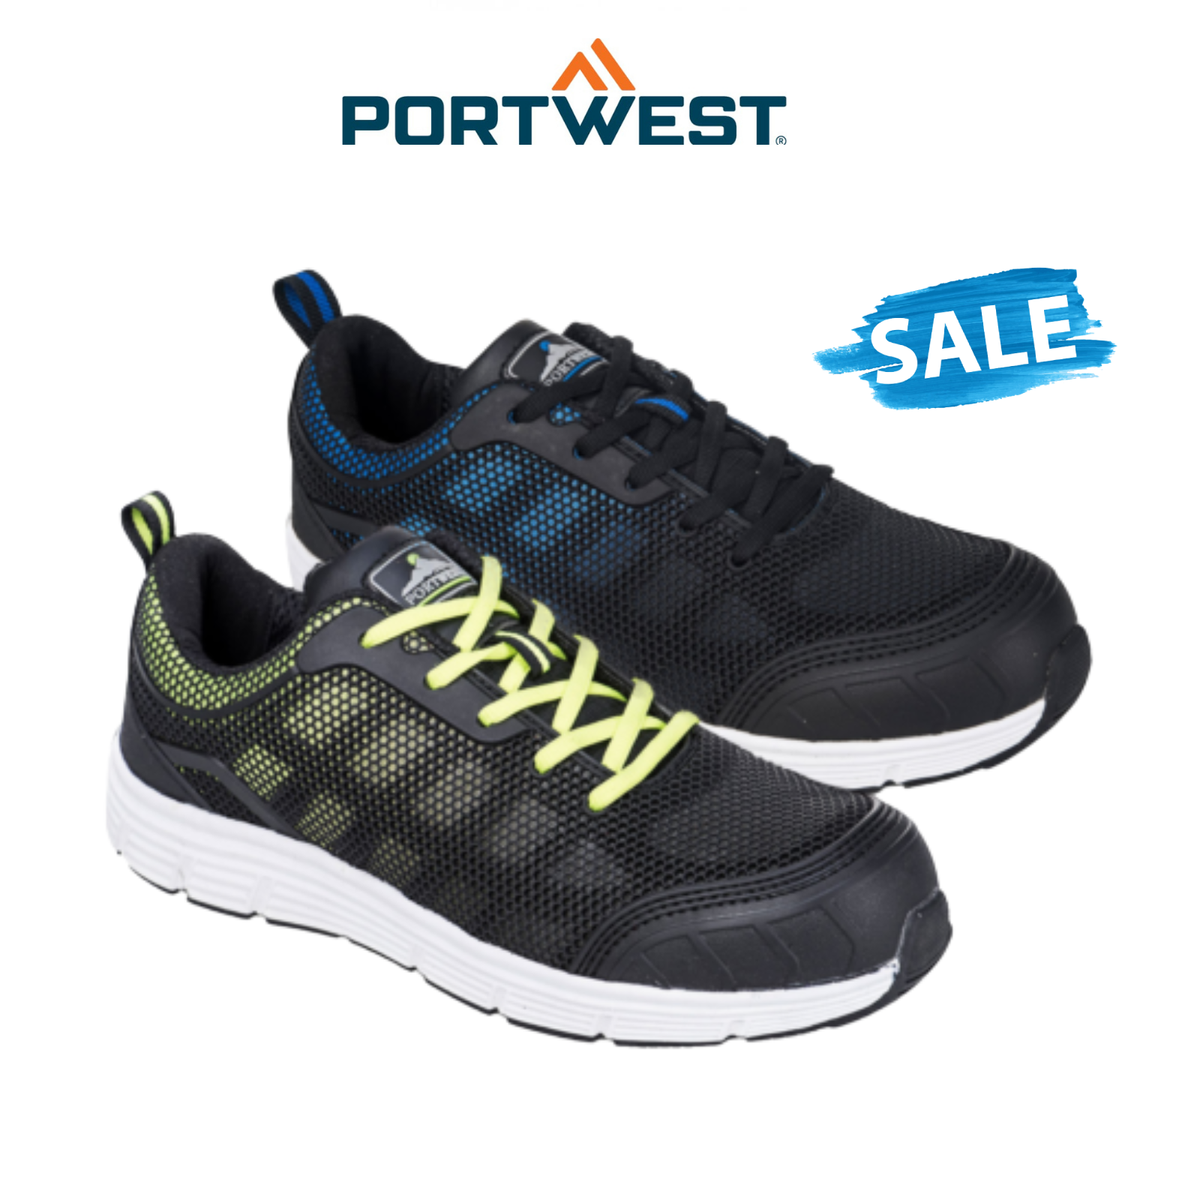 Portwest Steelite Tove Trainer Shoe S1P Lightweight Safety Protection FT15